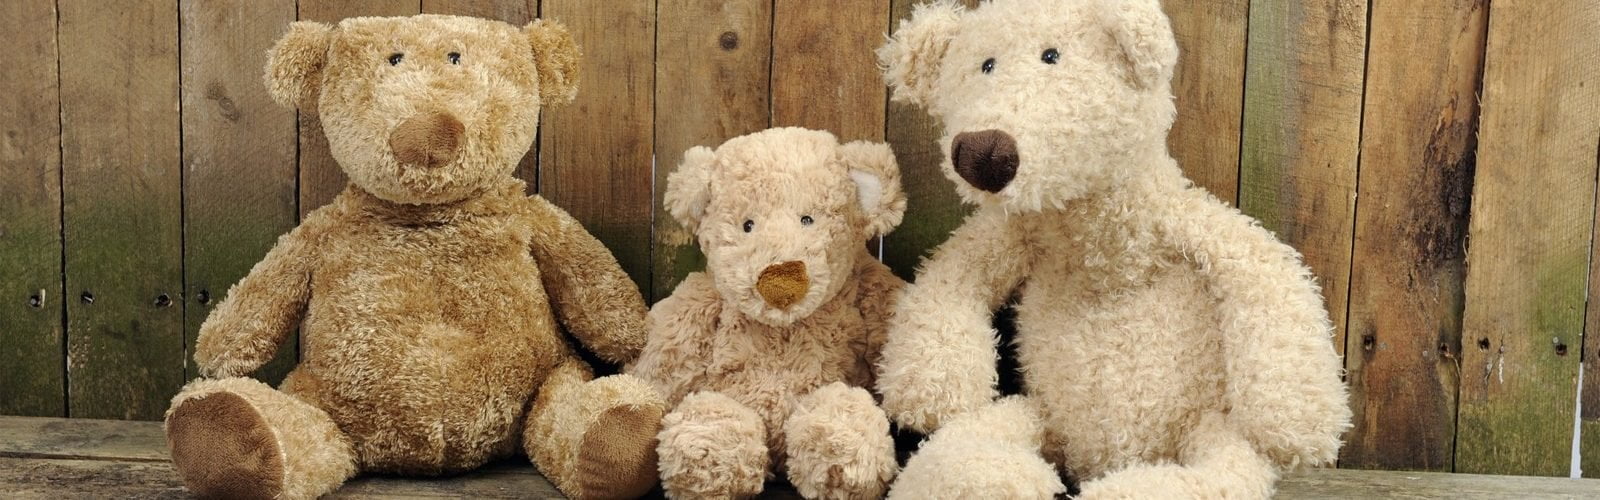 happy teddy day images love